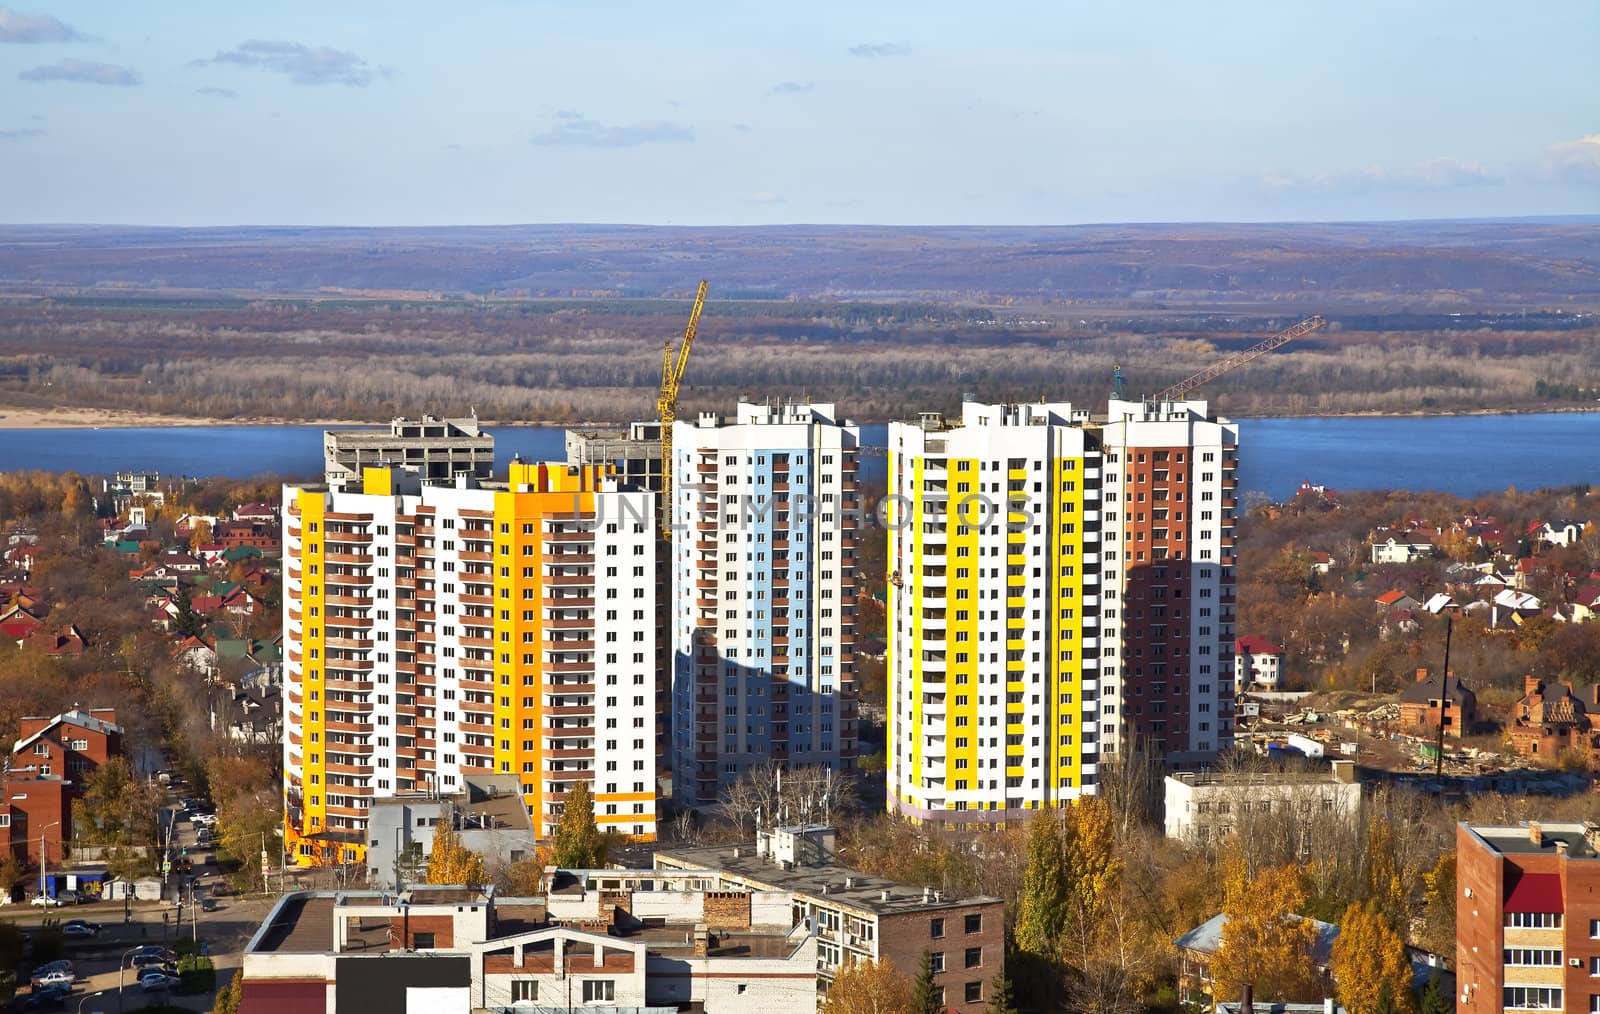 New Social apartment buildings in the residential area of Samara. Construction in the area of ??private houses on the banks of the Volga river.